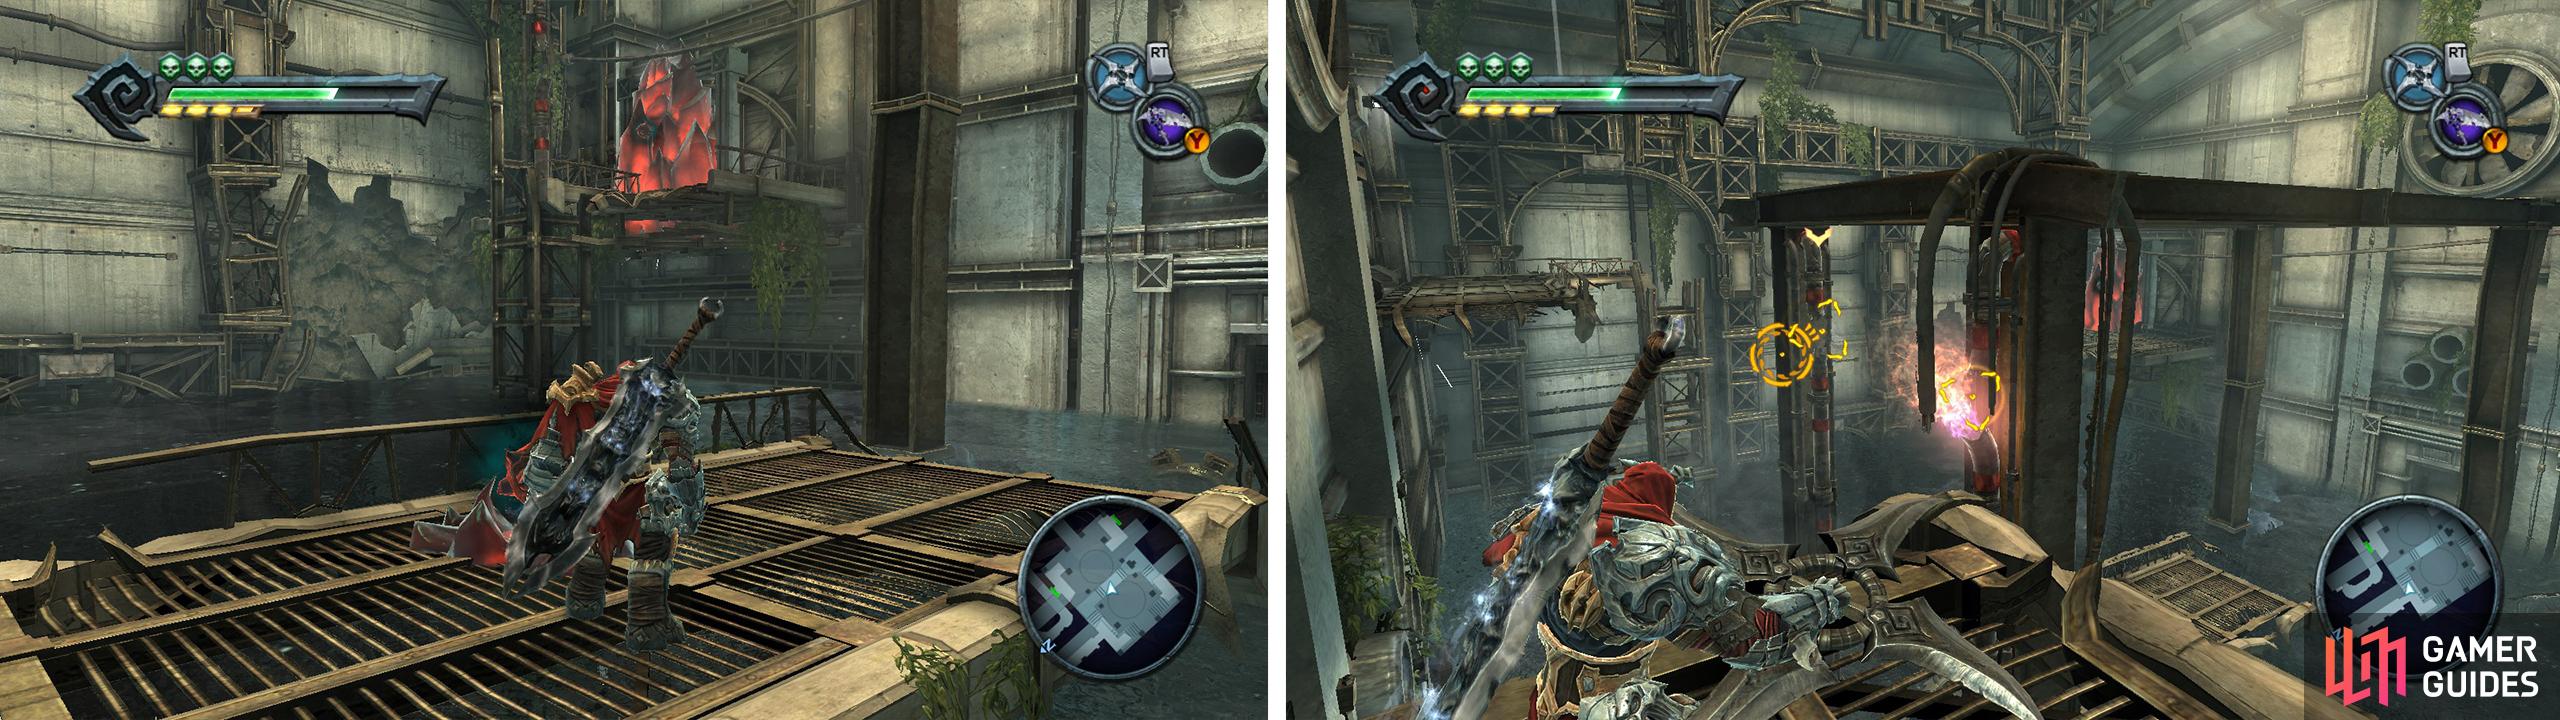 Place a bomb on the red crystals (left). Climb up and light all of the gas pipes (right) so that you can detonate the bomb.